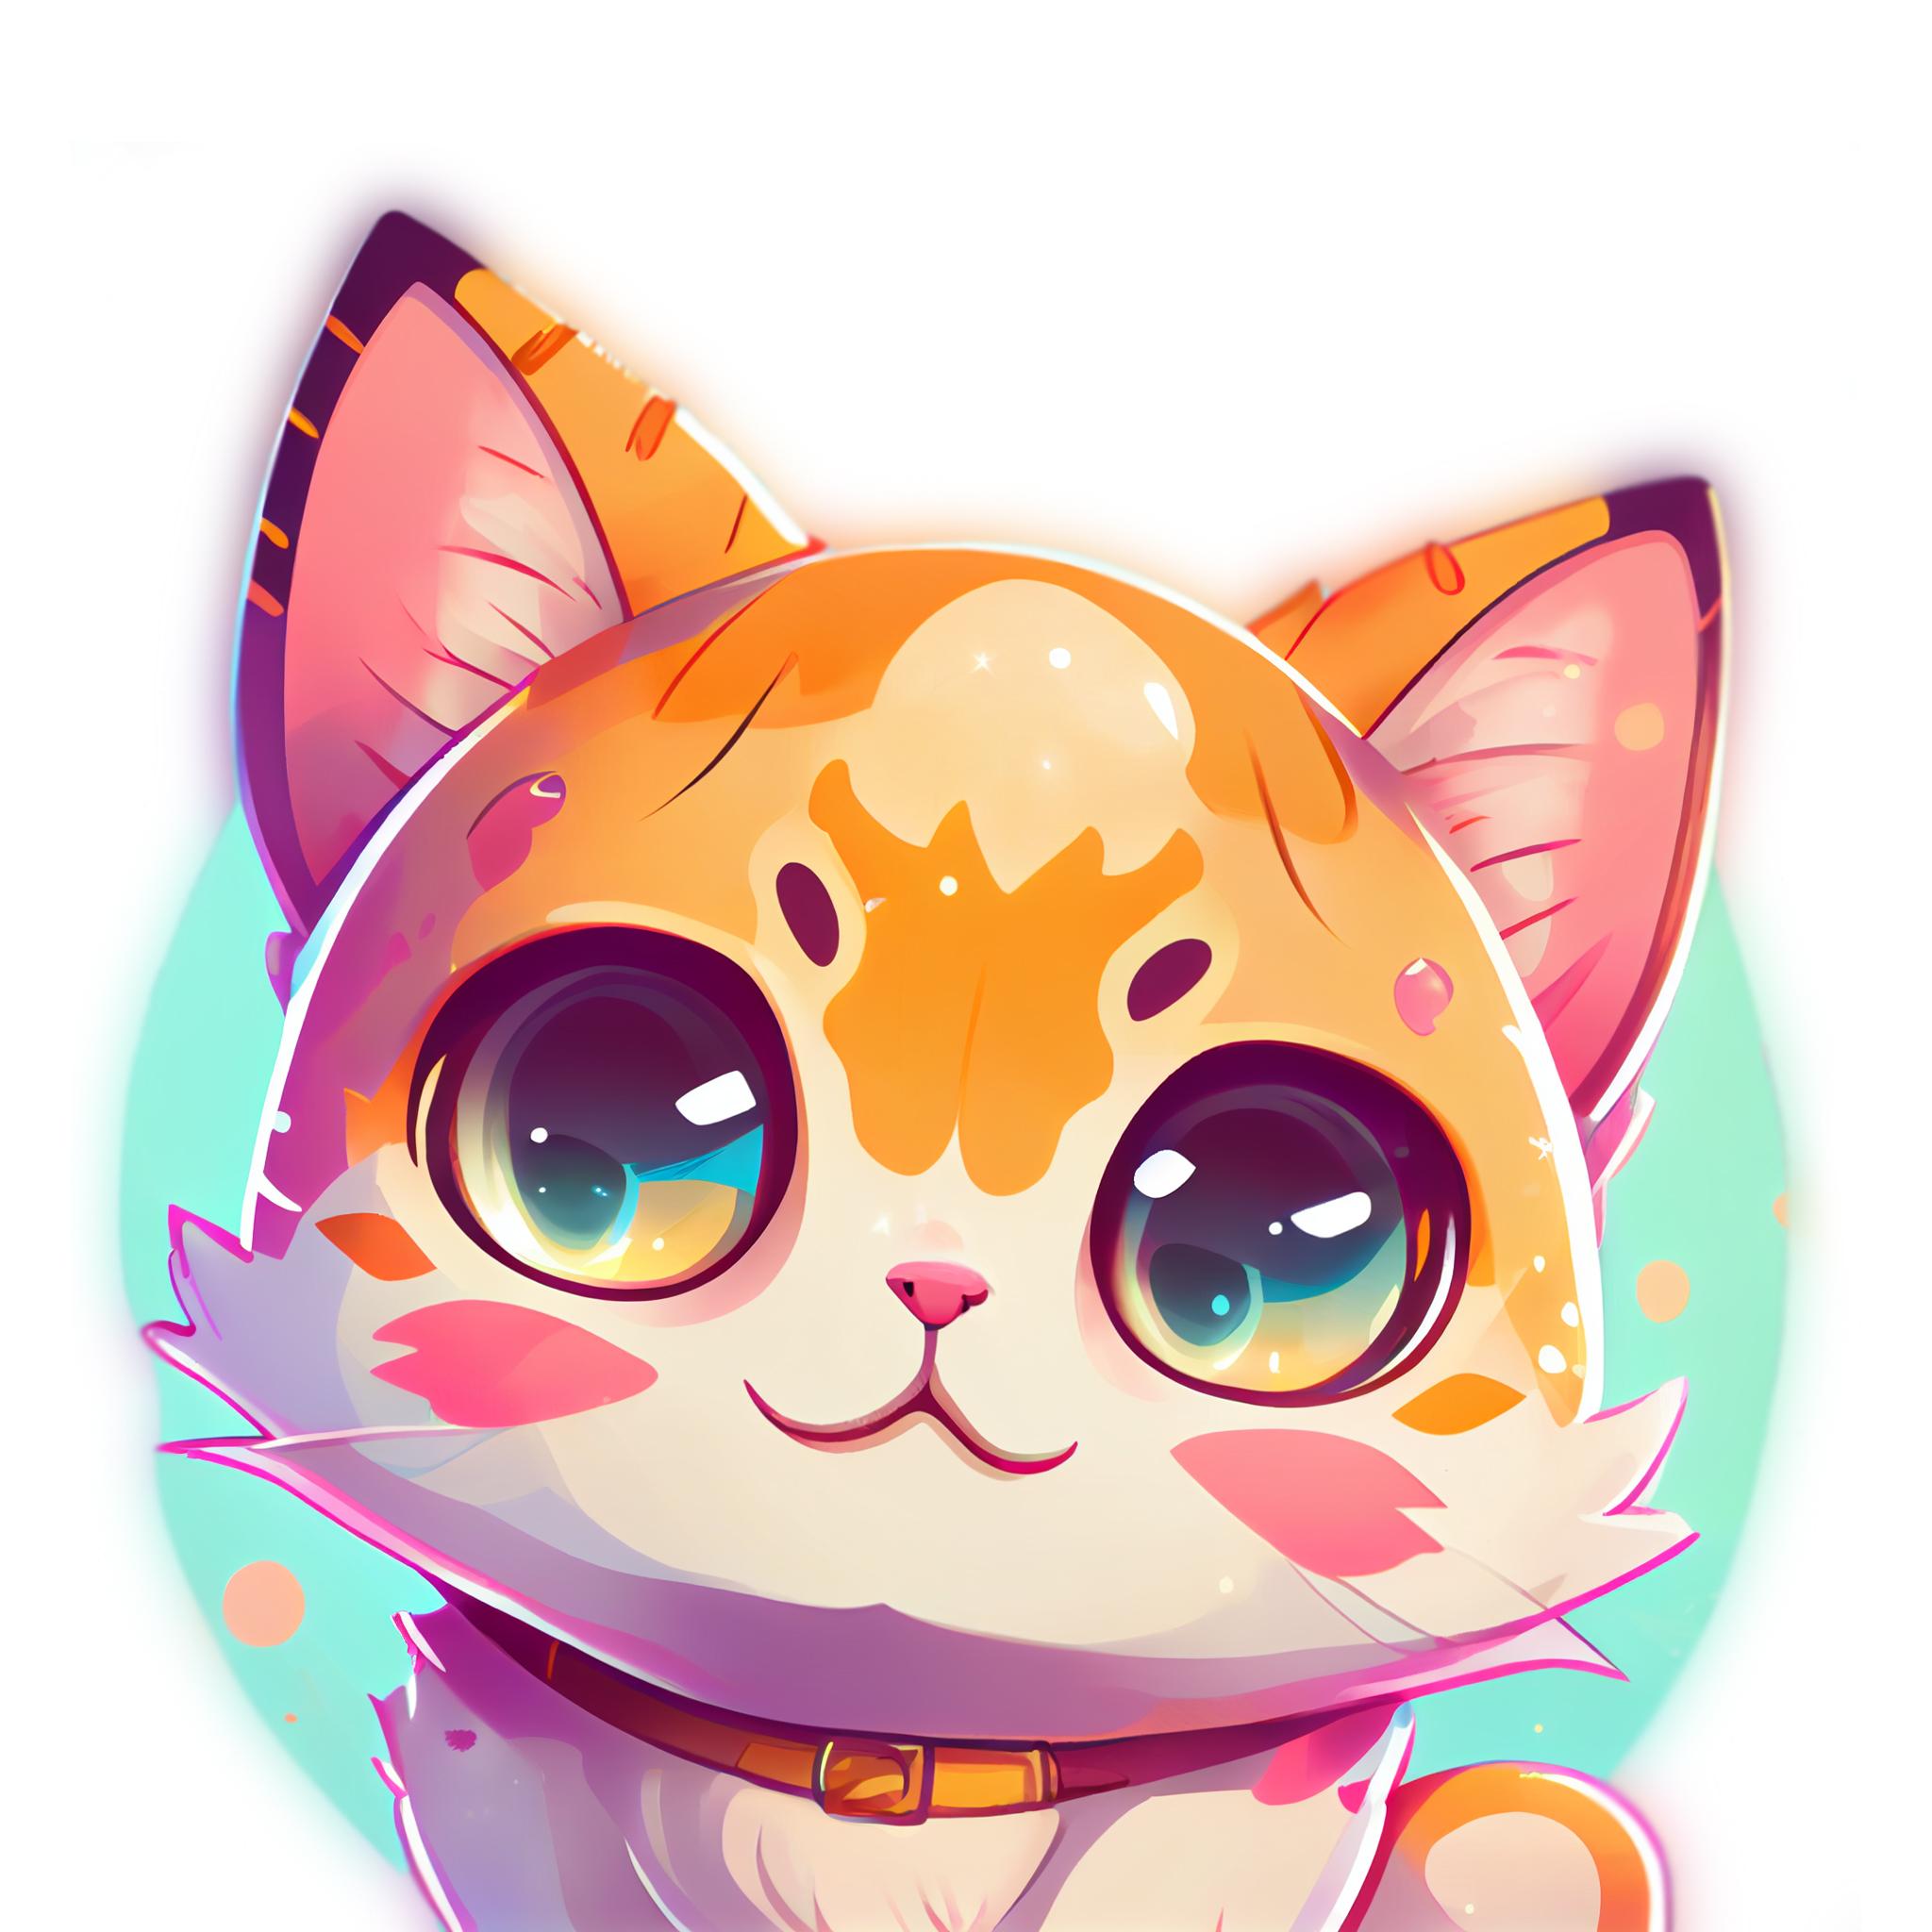 World of adorable kittens and cats! avatar